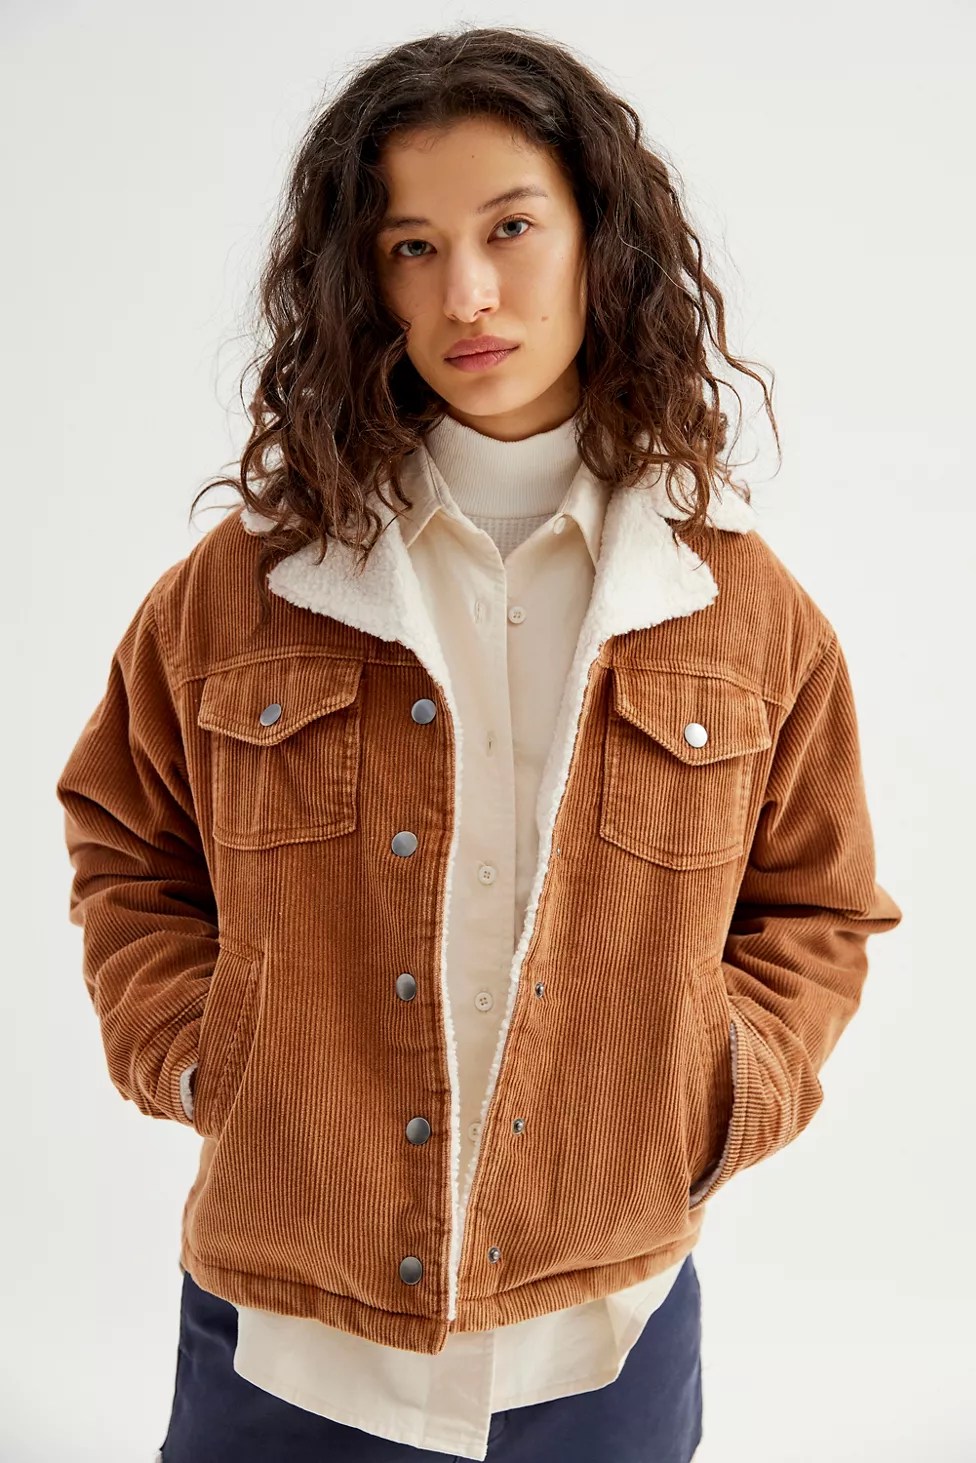 urban outfitters sherpa lined corduroy jacket, one of the best women's jackets for spring